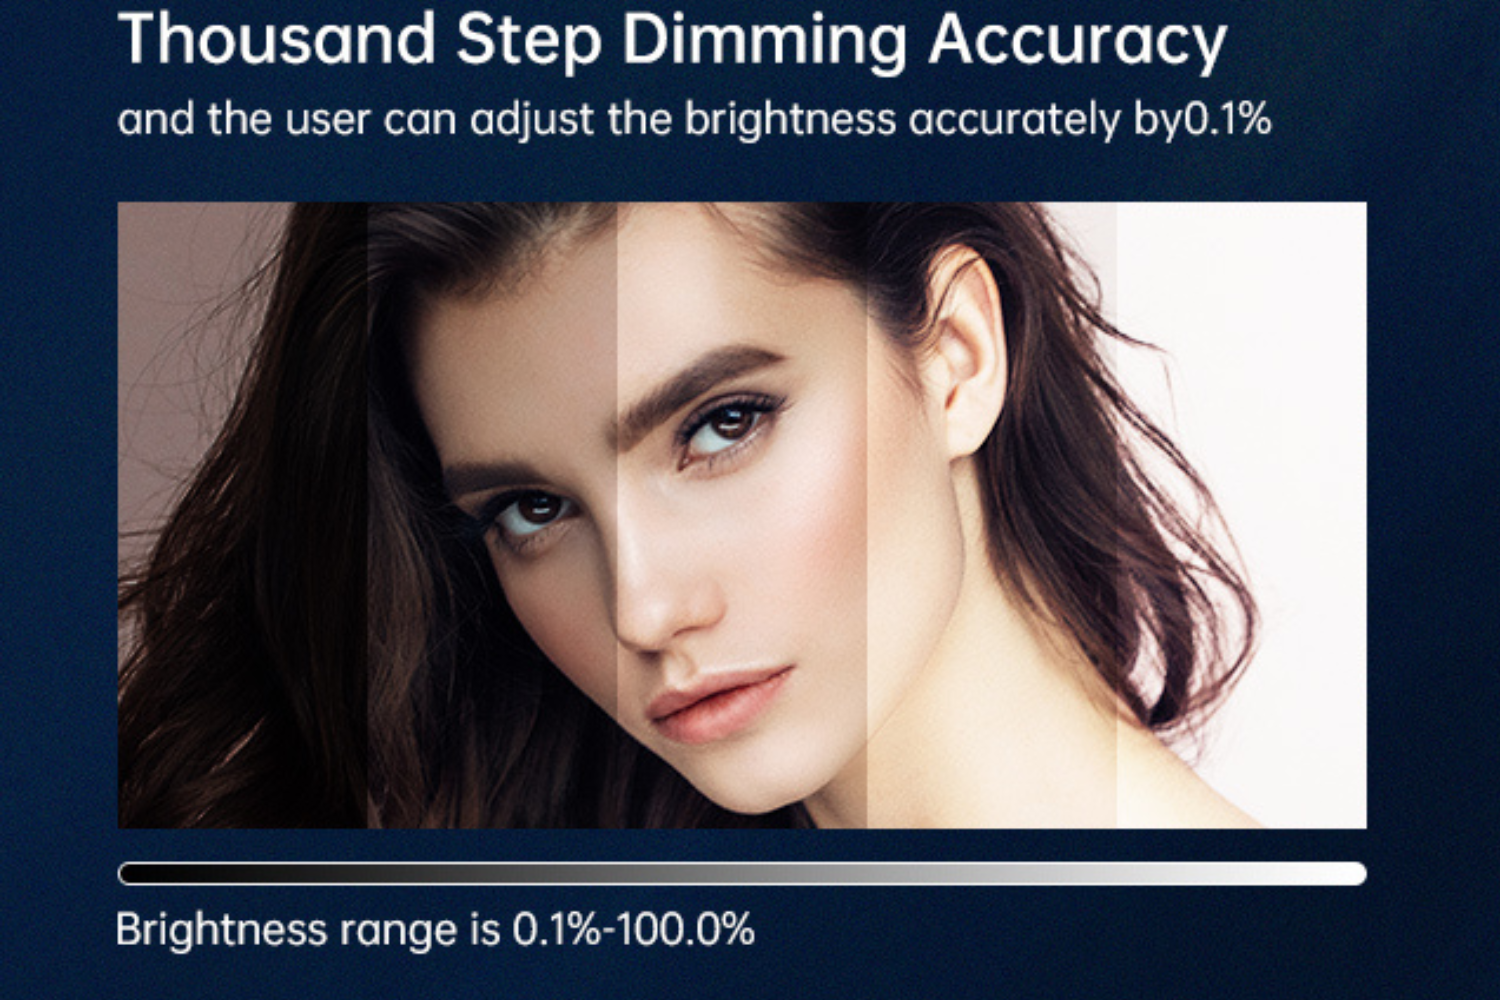 Thousand-step Dimming Accuracy